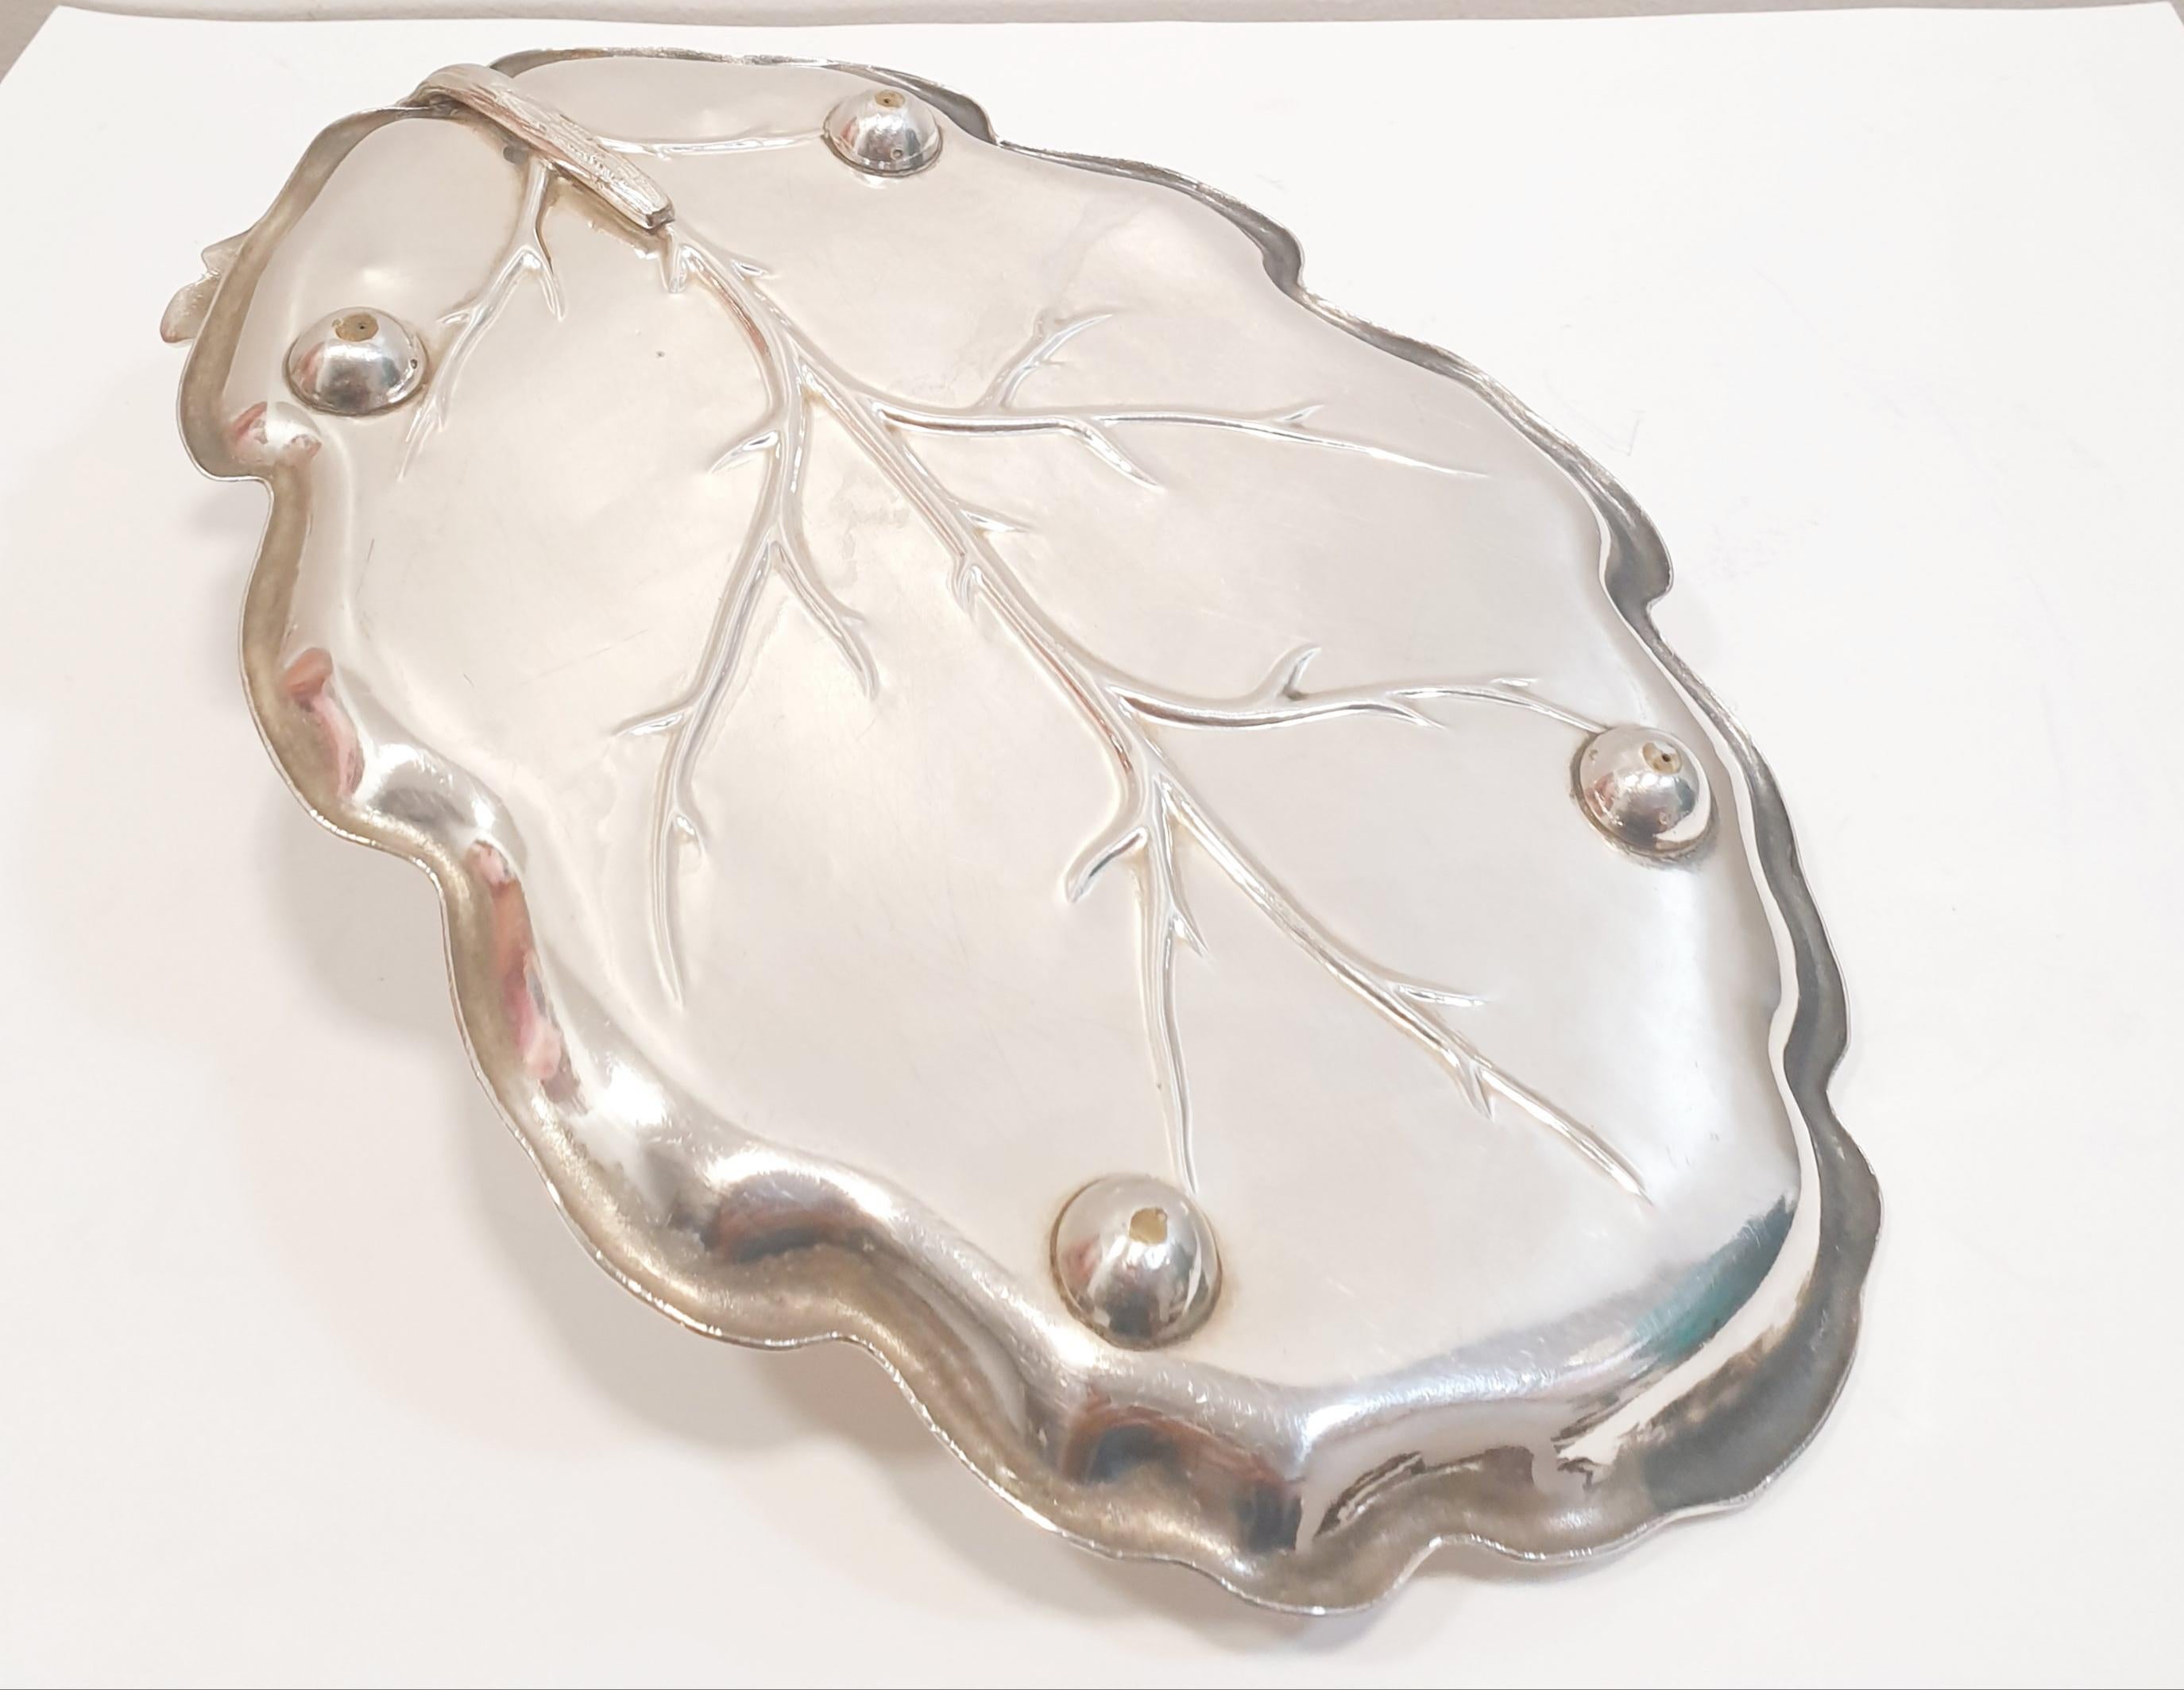 Carved Antique Silver Tray from the 19th Century